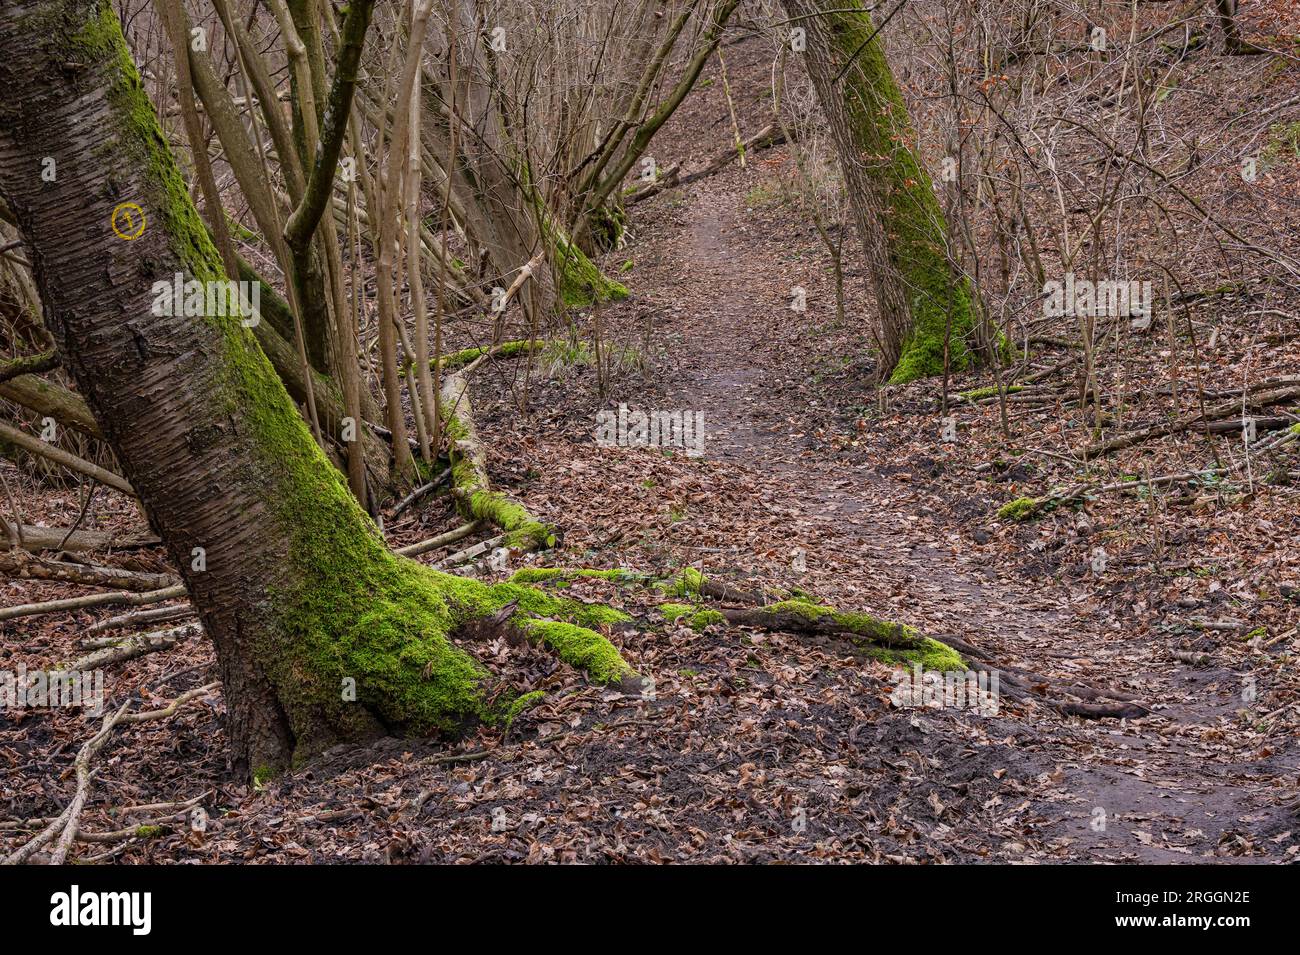 A lonely path through the winter fairy tale forest with fallen trees and leaves on the ground, Germany Stock Photo